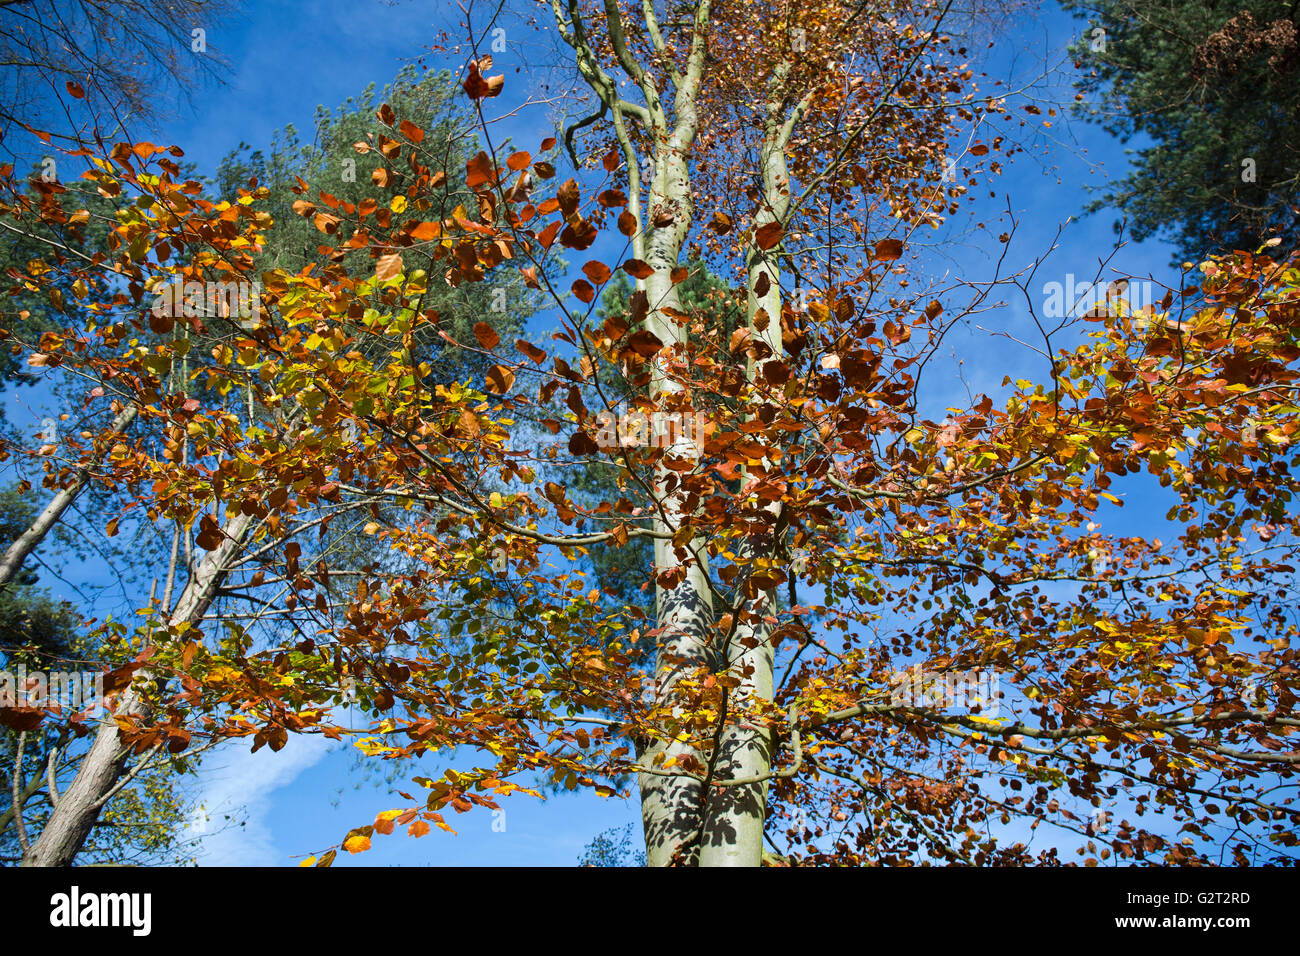 Stunning autumnal hues and tints from the Beech tree set aginst a vivid blue sky in autumn Cannock Chase Stock Photo